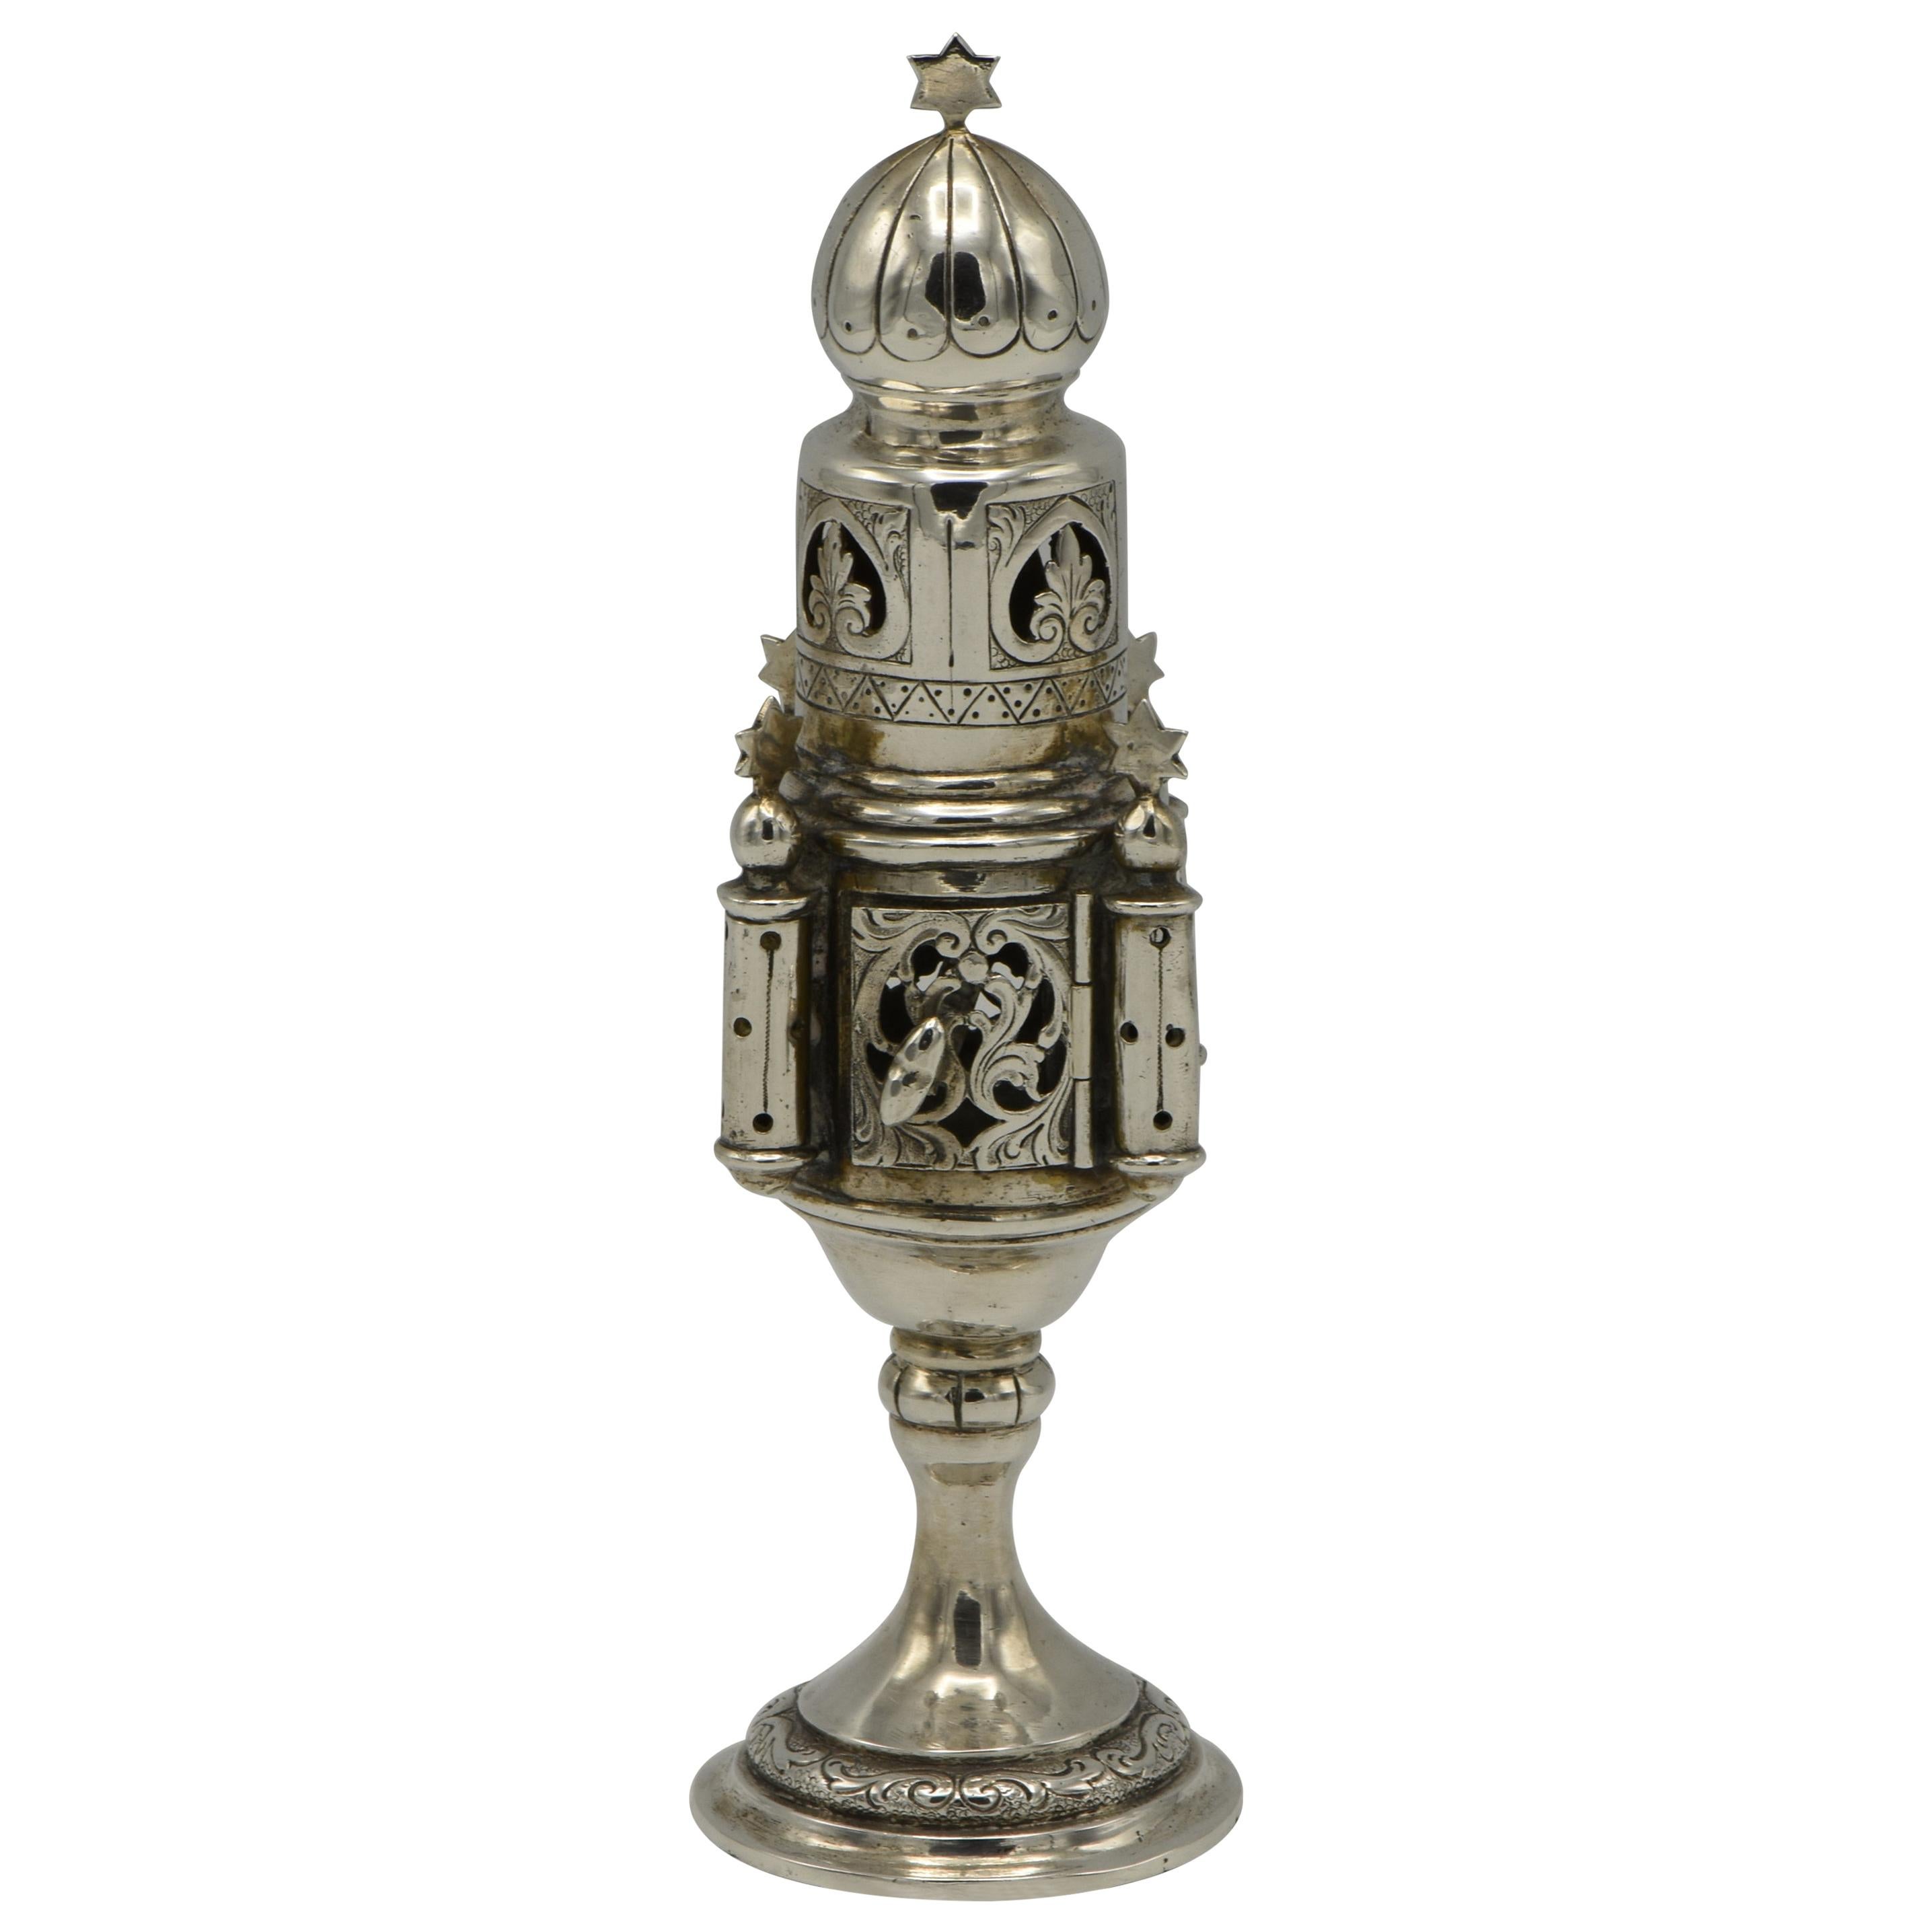 Late 19th Century German Silver Spice Tower